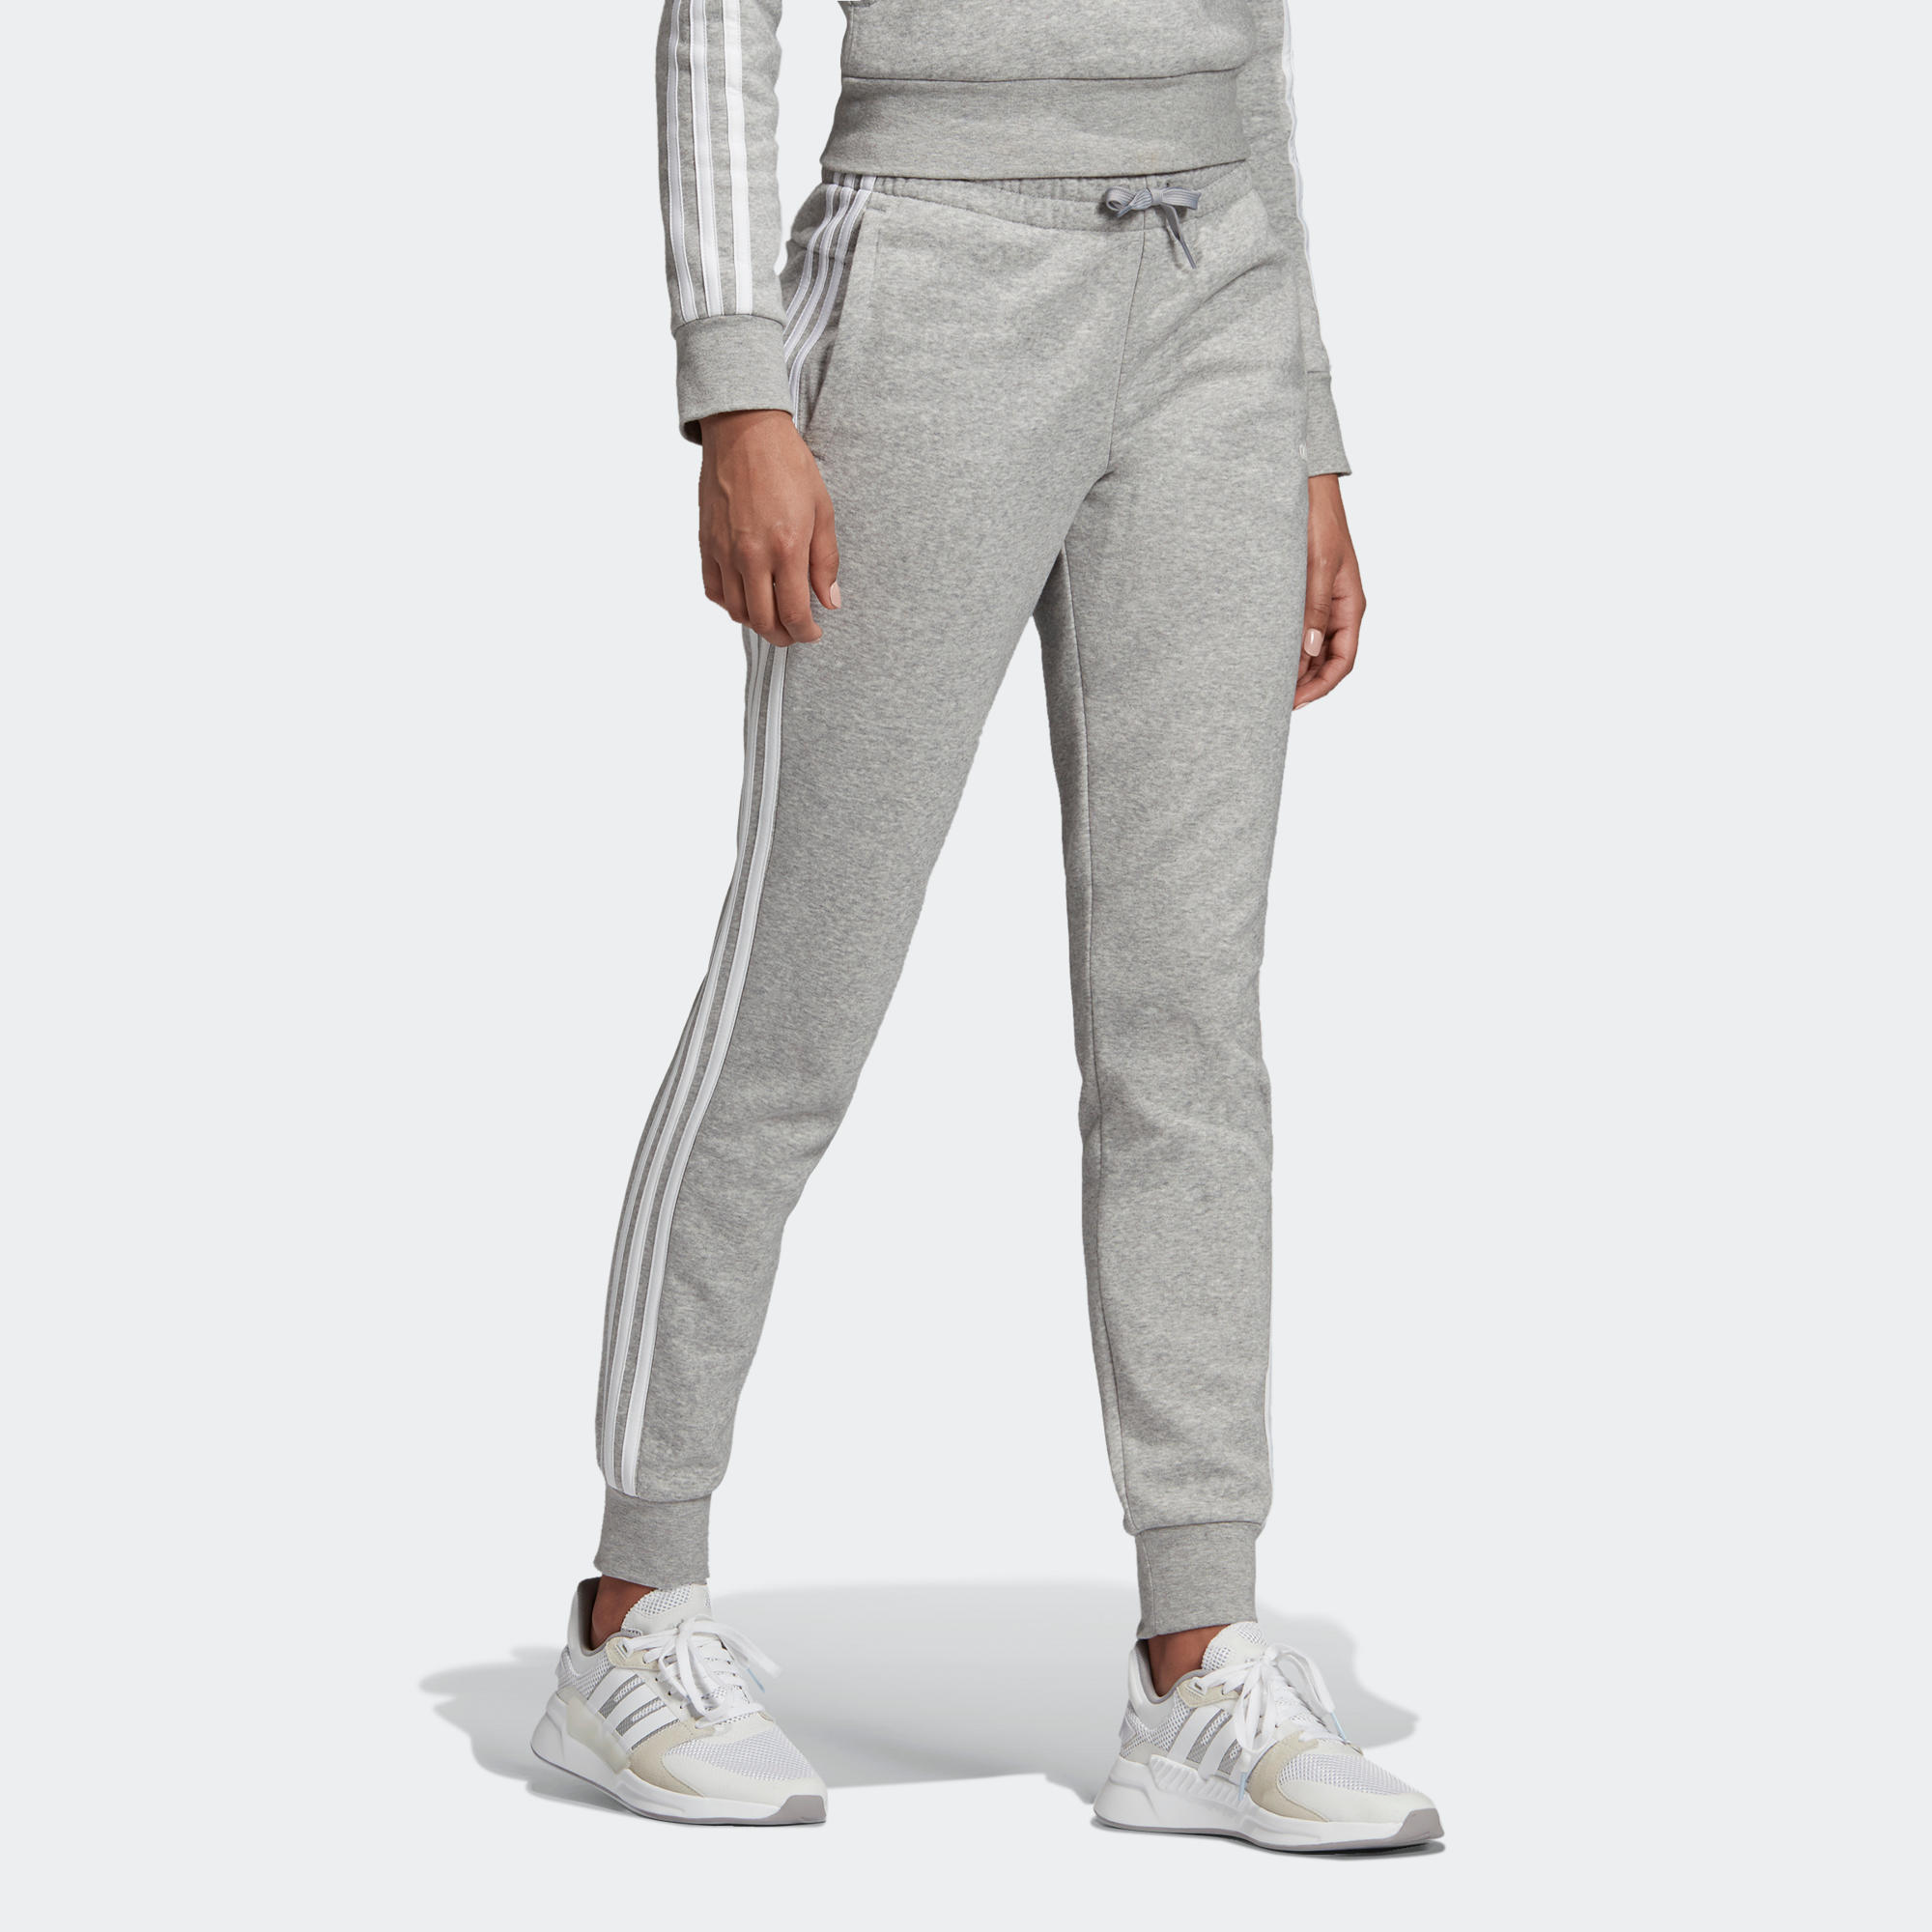 chandal adidas gris mujer